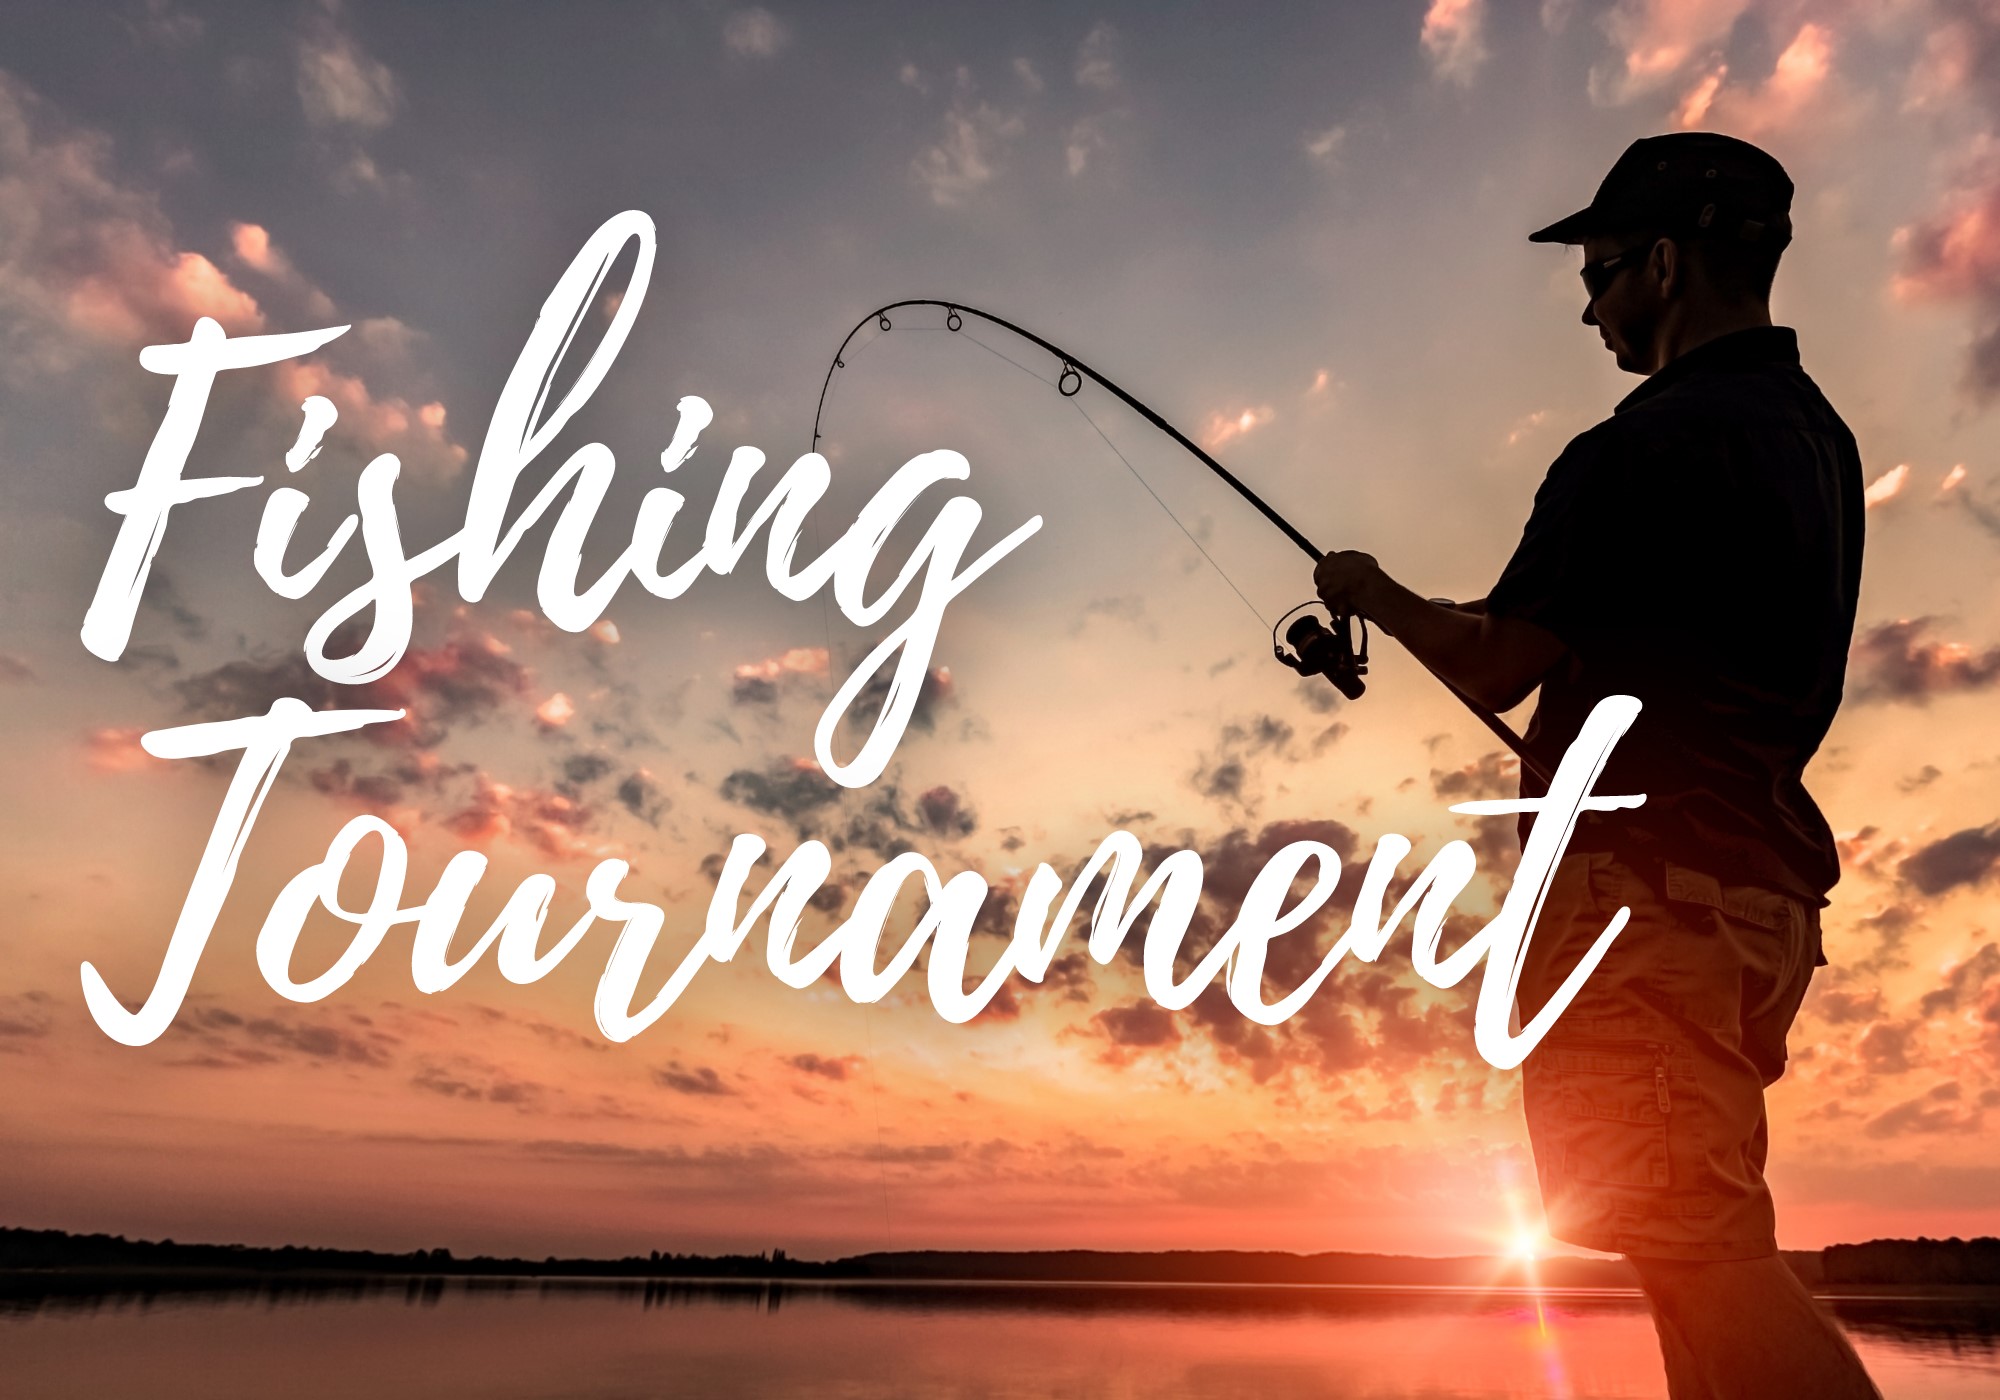 19-facts-about-fishing-tournament